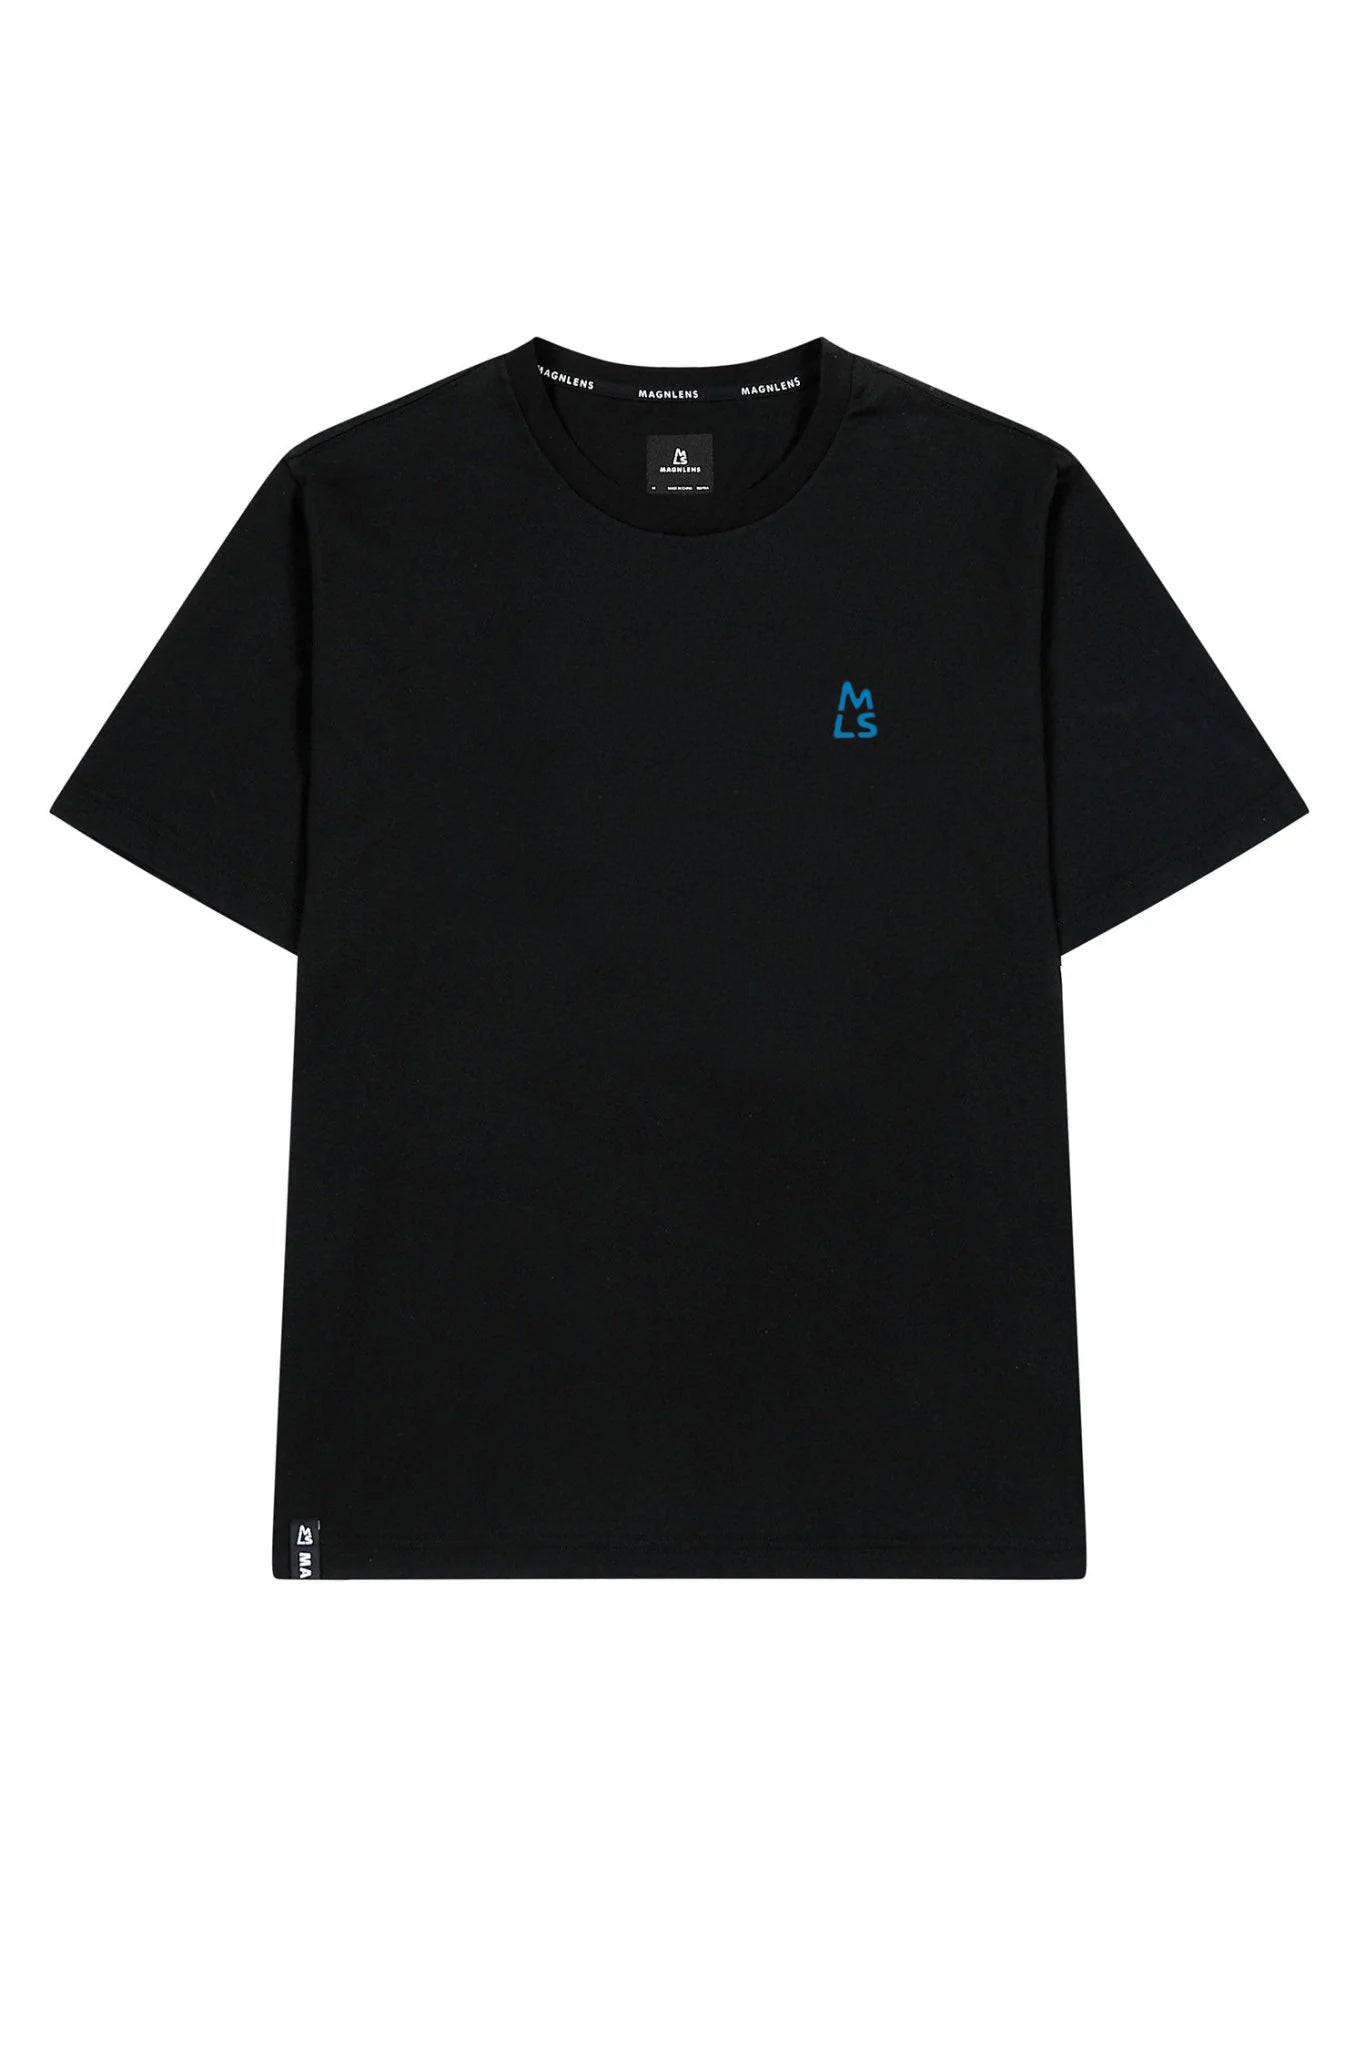 Relaxed Fit Graphic Tee - Magnlens